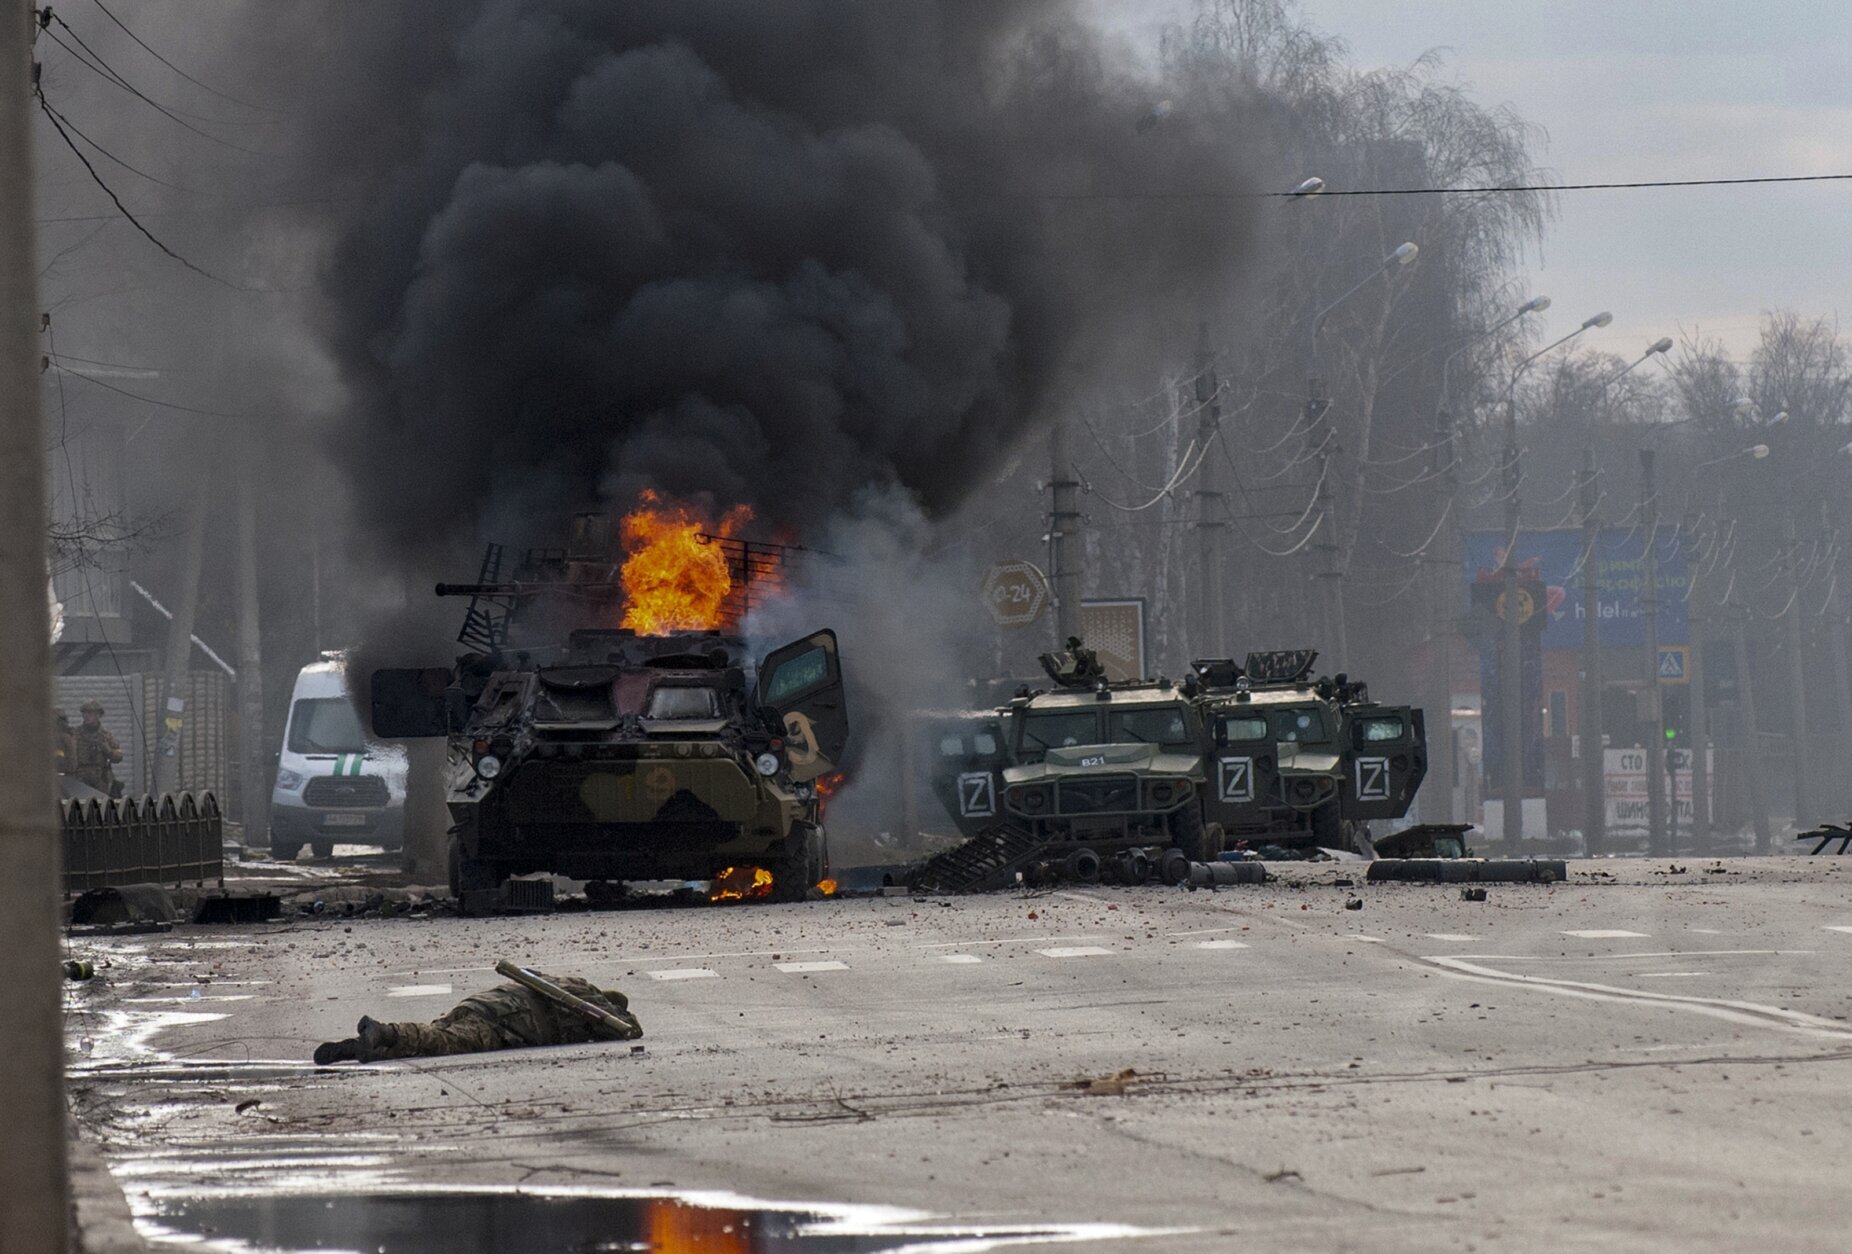 ADDS THAT THE PERSONNEL CARRIER IS RUSSIAN - A Russian armored personnel carrier burns amid damaged and abandoned light utility vehicles after fighting in Kharkiv, Ukraine, Sunday, Feb. 27, 2022. The city authorities said that Ukrainian forces engaged in fighting with Russian troops that entered the country's second-largest city on Sunday. (AP Photo/Marienko Andrew)